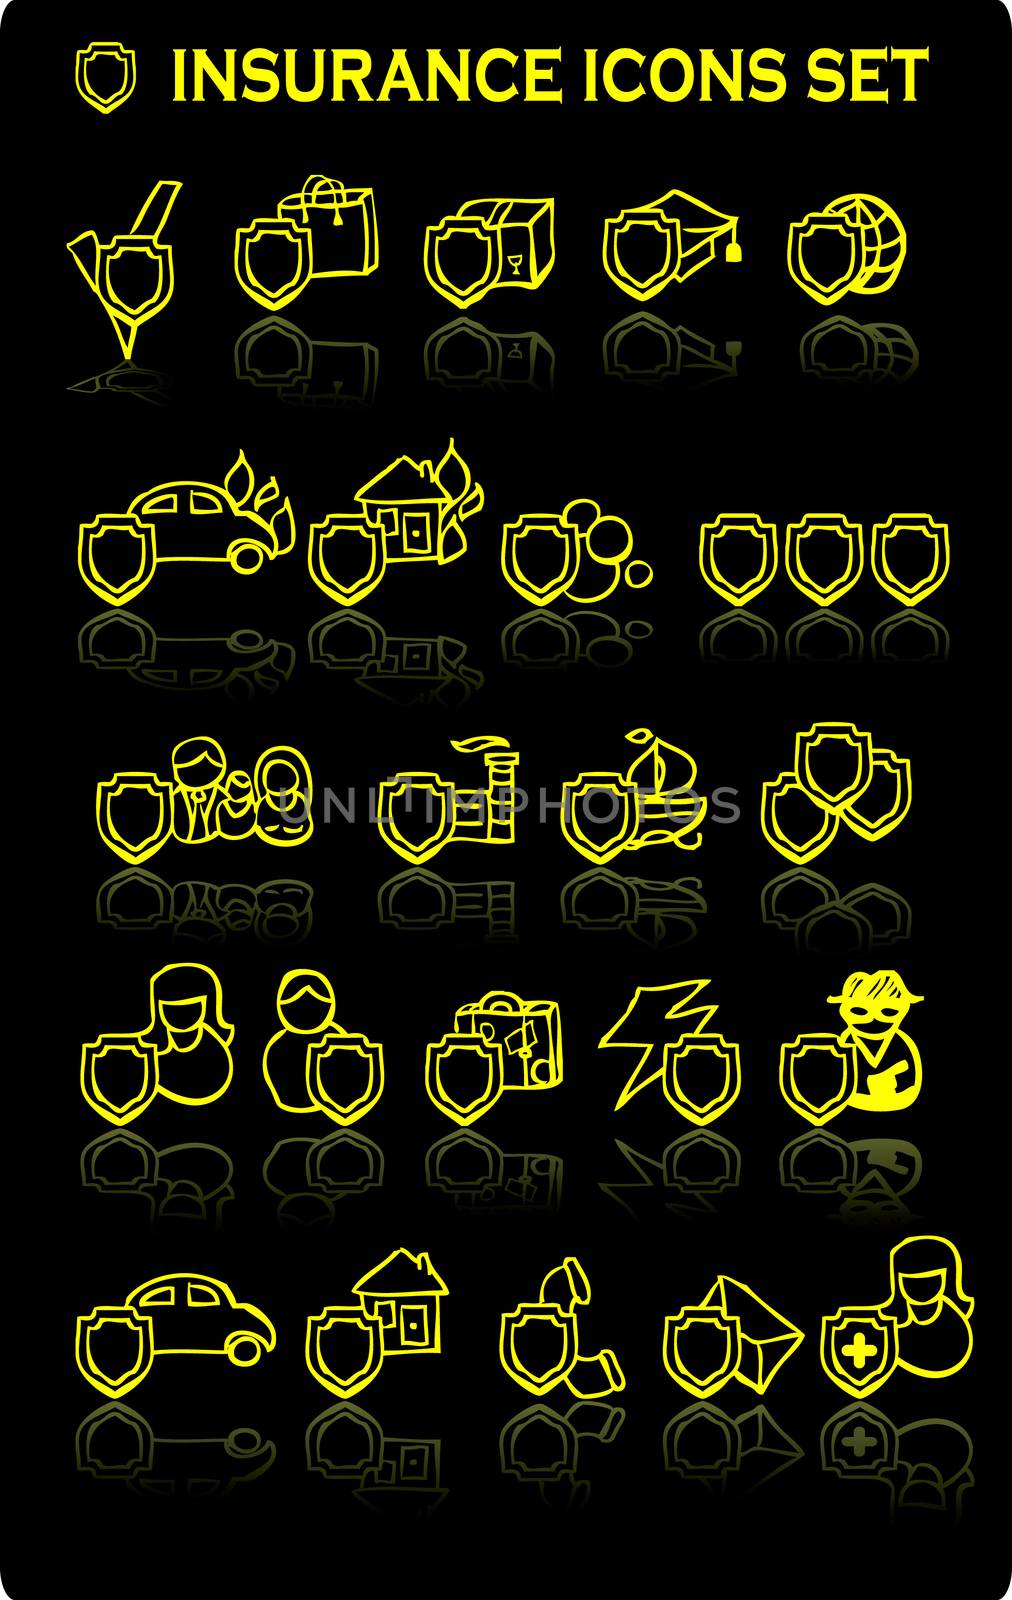 black background insurance icons set, all types, big vector art  by IconsJewelry